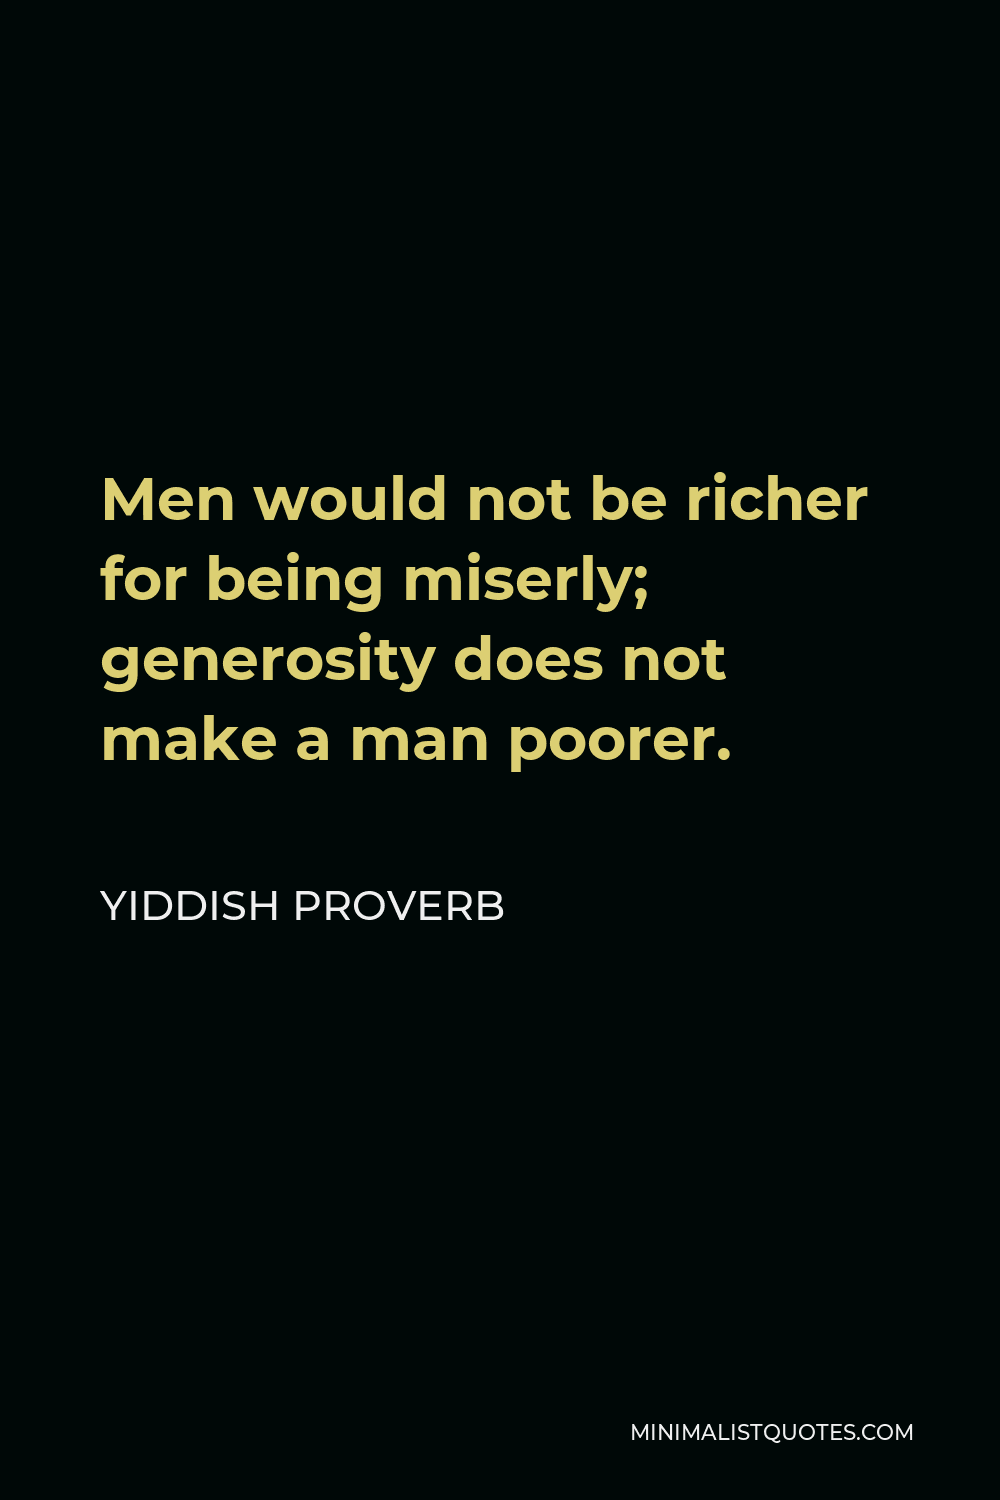 Yiddish Proverb Quote - Men would not be richer for being miserly; generosity does not make a man poorer.